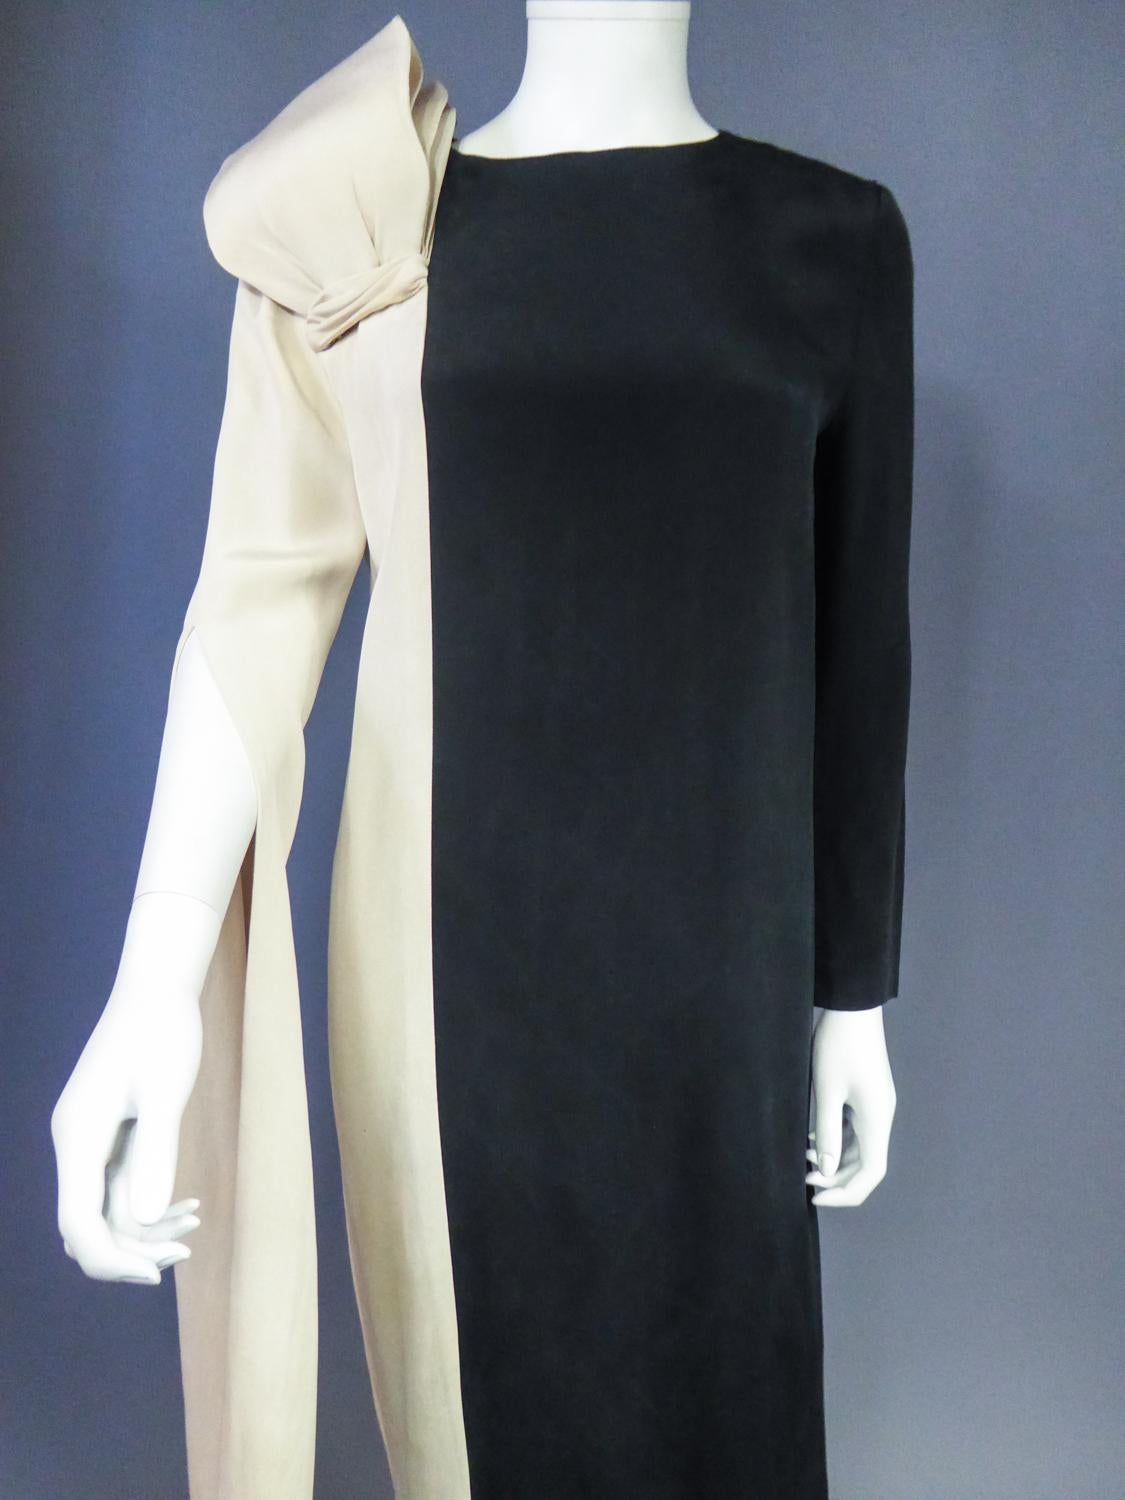 Circa 1975/1985
France

Astonishing evening Peplum dress in silk jersey playing with the bichromy of Yin and Yang, and signed by Pierre Cardin Prestige dating from the early 1980s. Funny nod to Yves Mathieu Saint Laurent at Dior in 1955 in the more